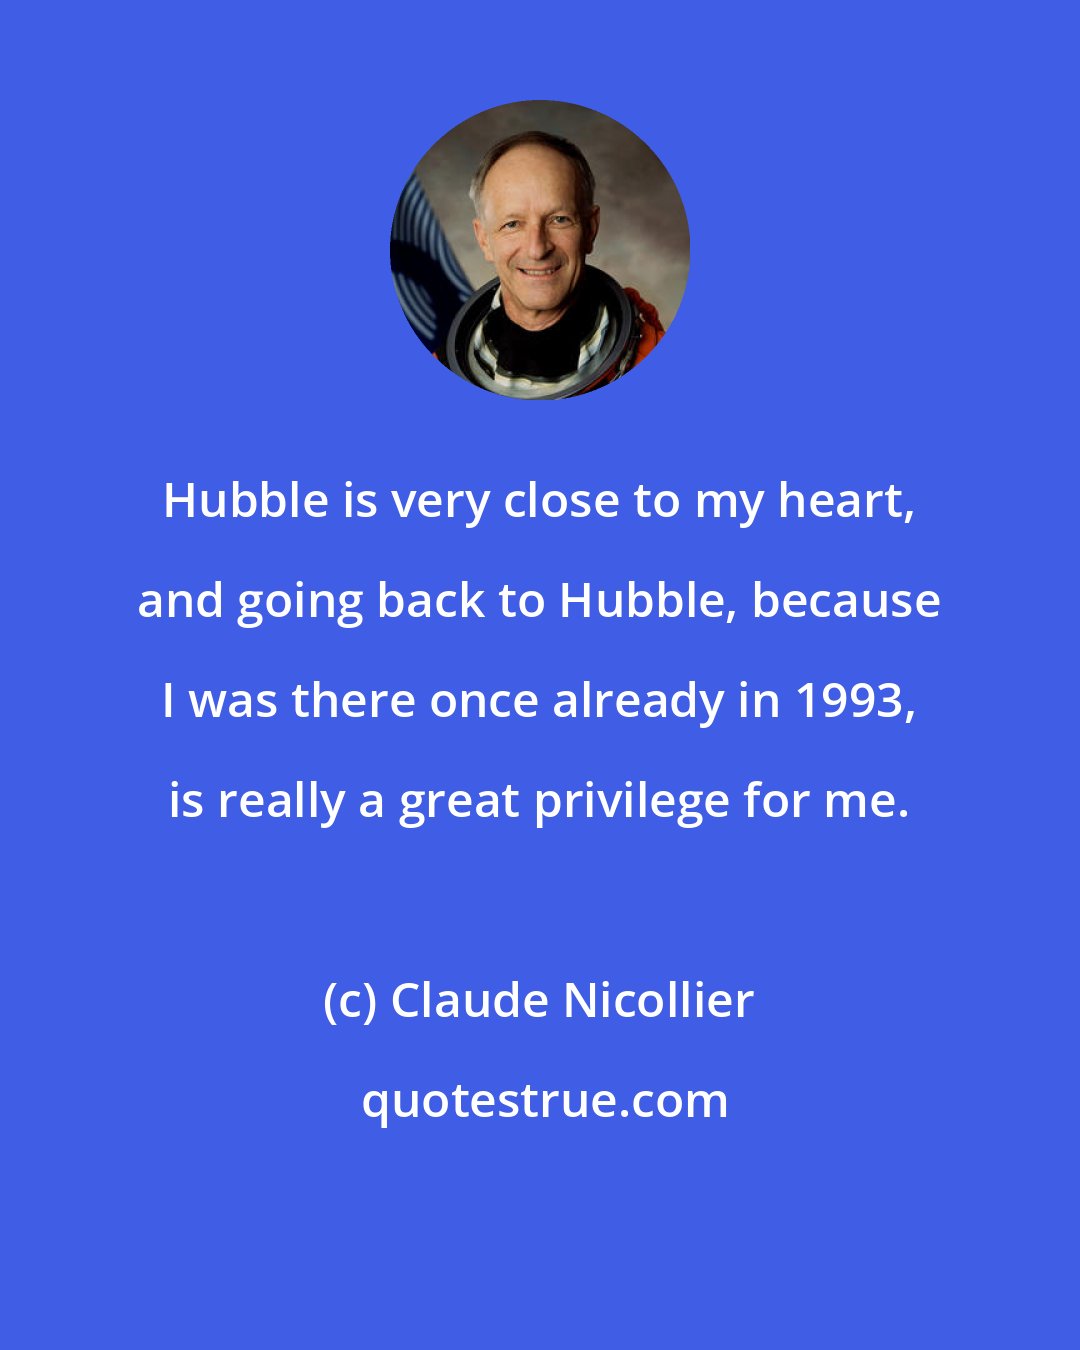 Claude Nicollier: Hubble is very close to my heart, and going back to Hubble, because I was there once already in 1993, is really a great privilege for me.